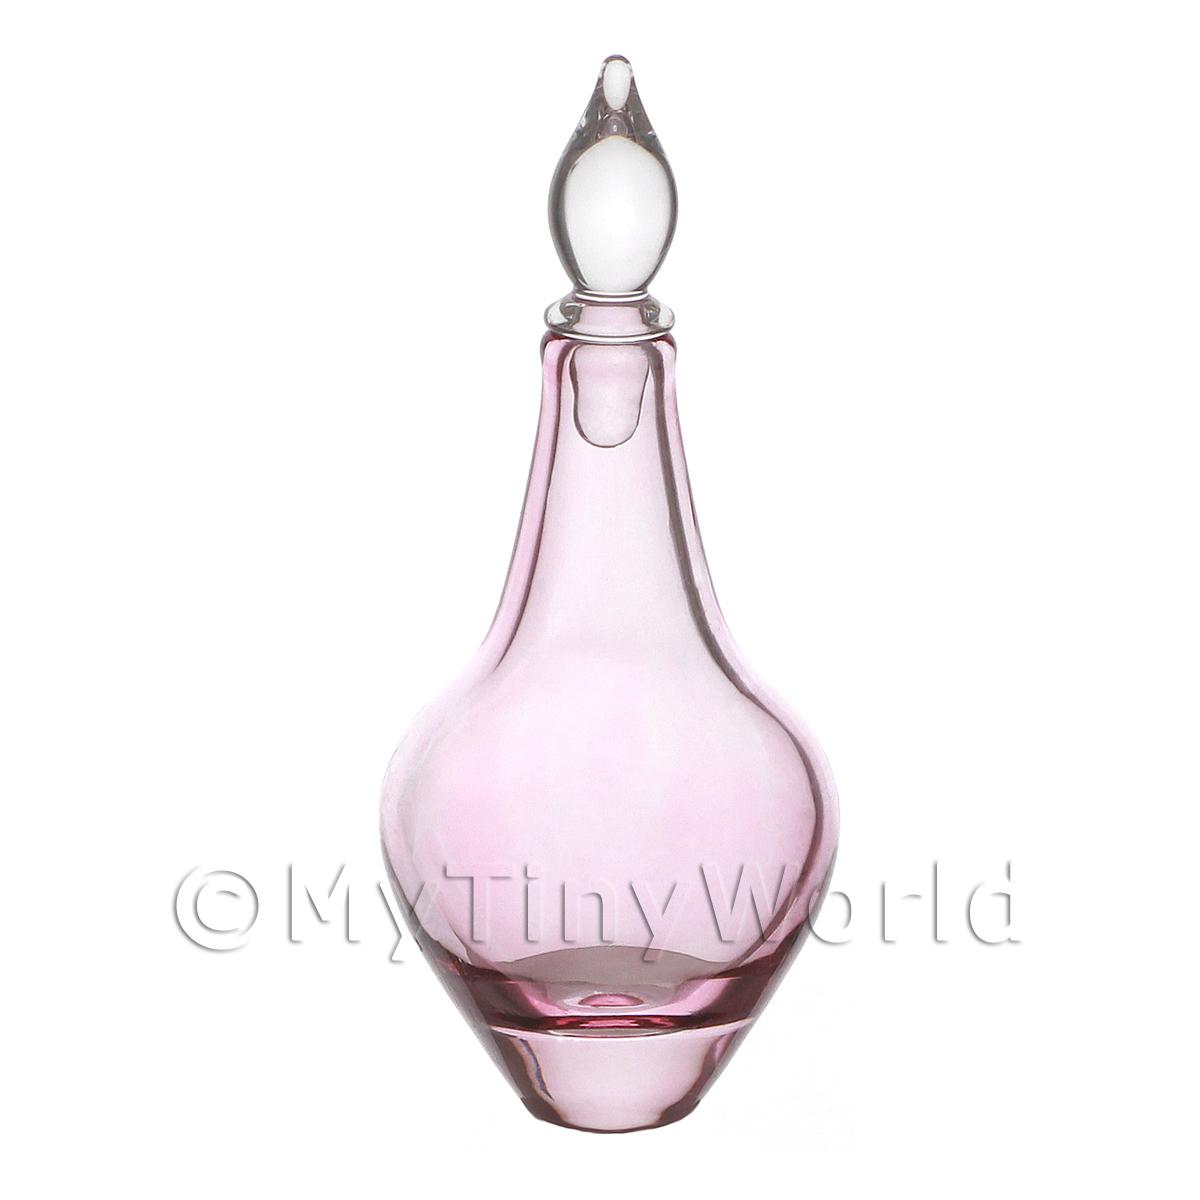 Decanter Miniature Handmade Red Pear Shaped Apothecary Bottle 